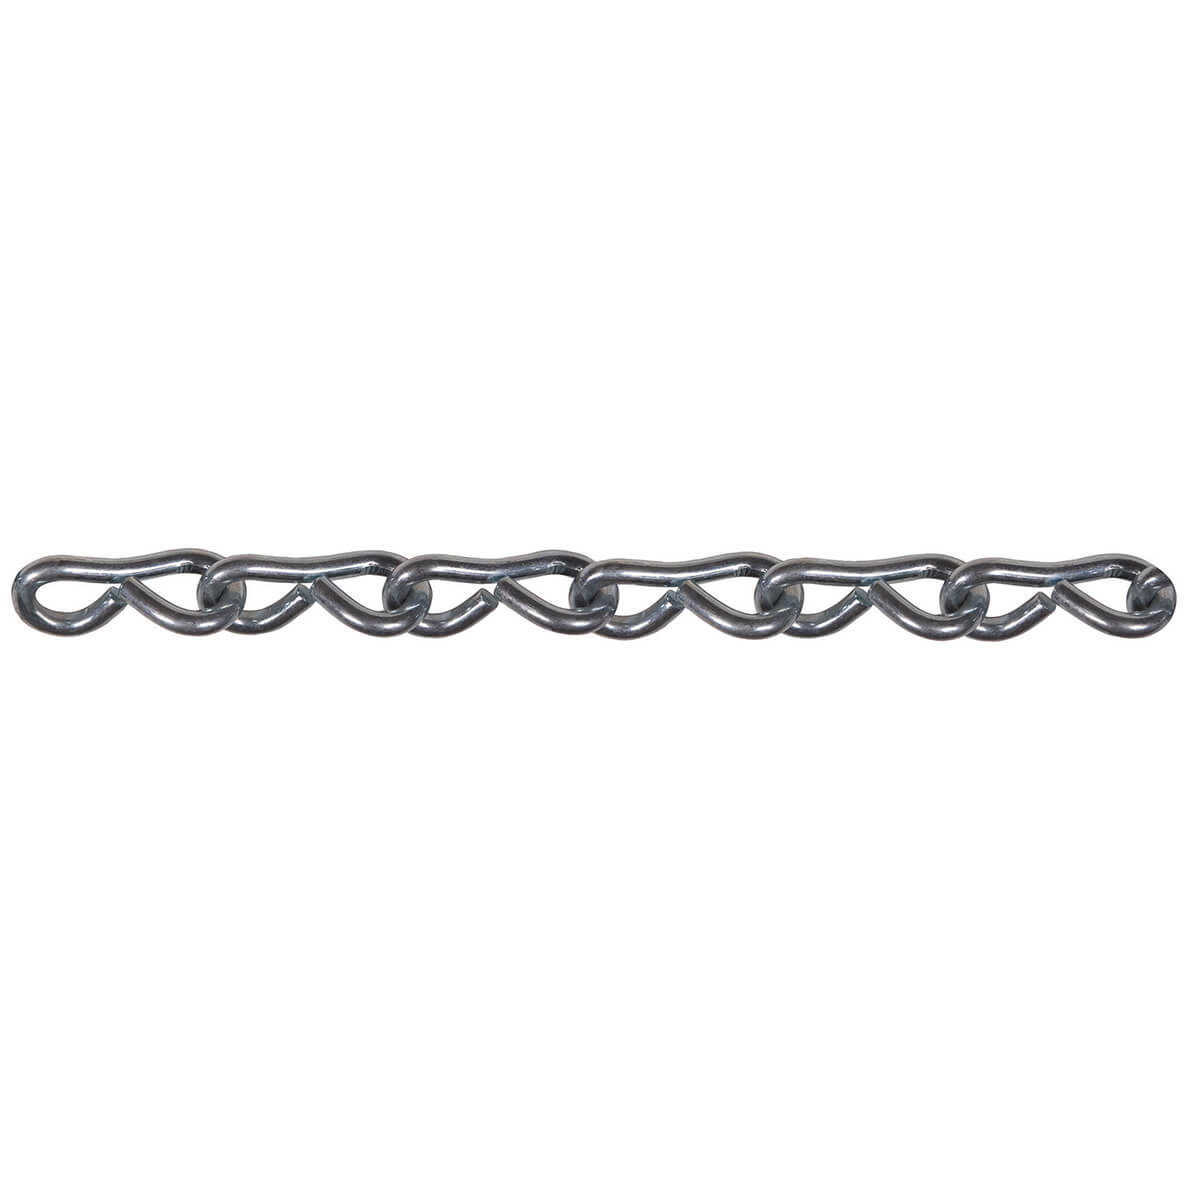 Electrical Fixture Chain - Single Jack